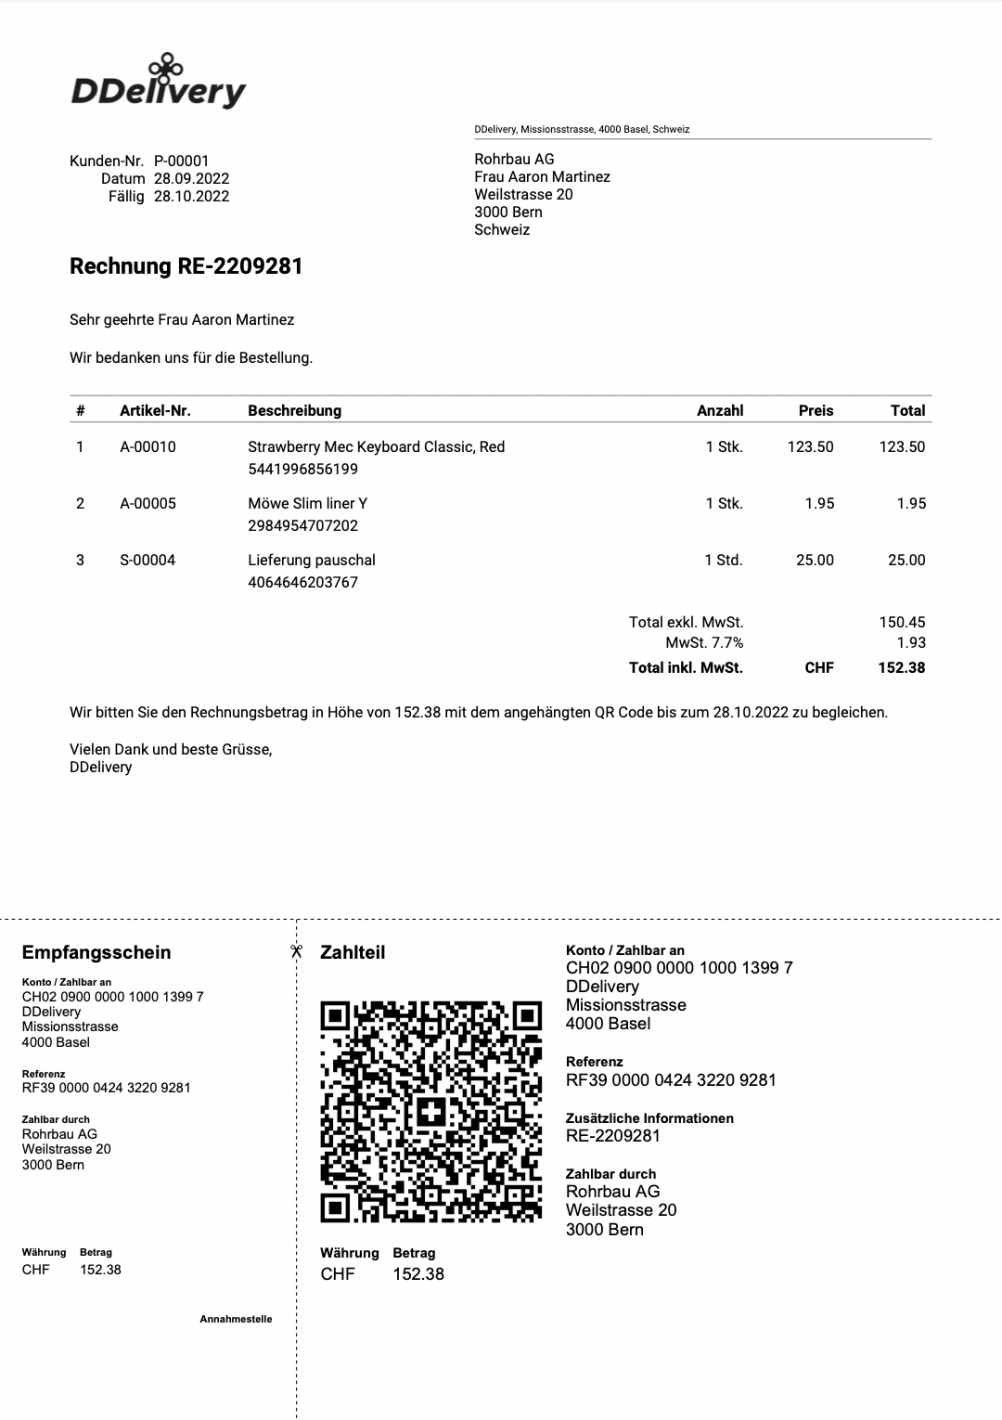 View an invoice document with QR code